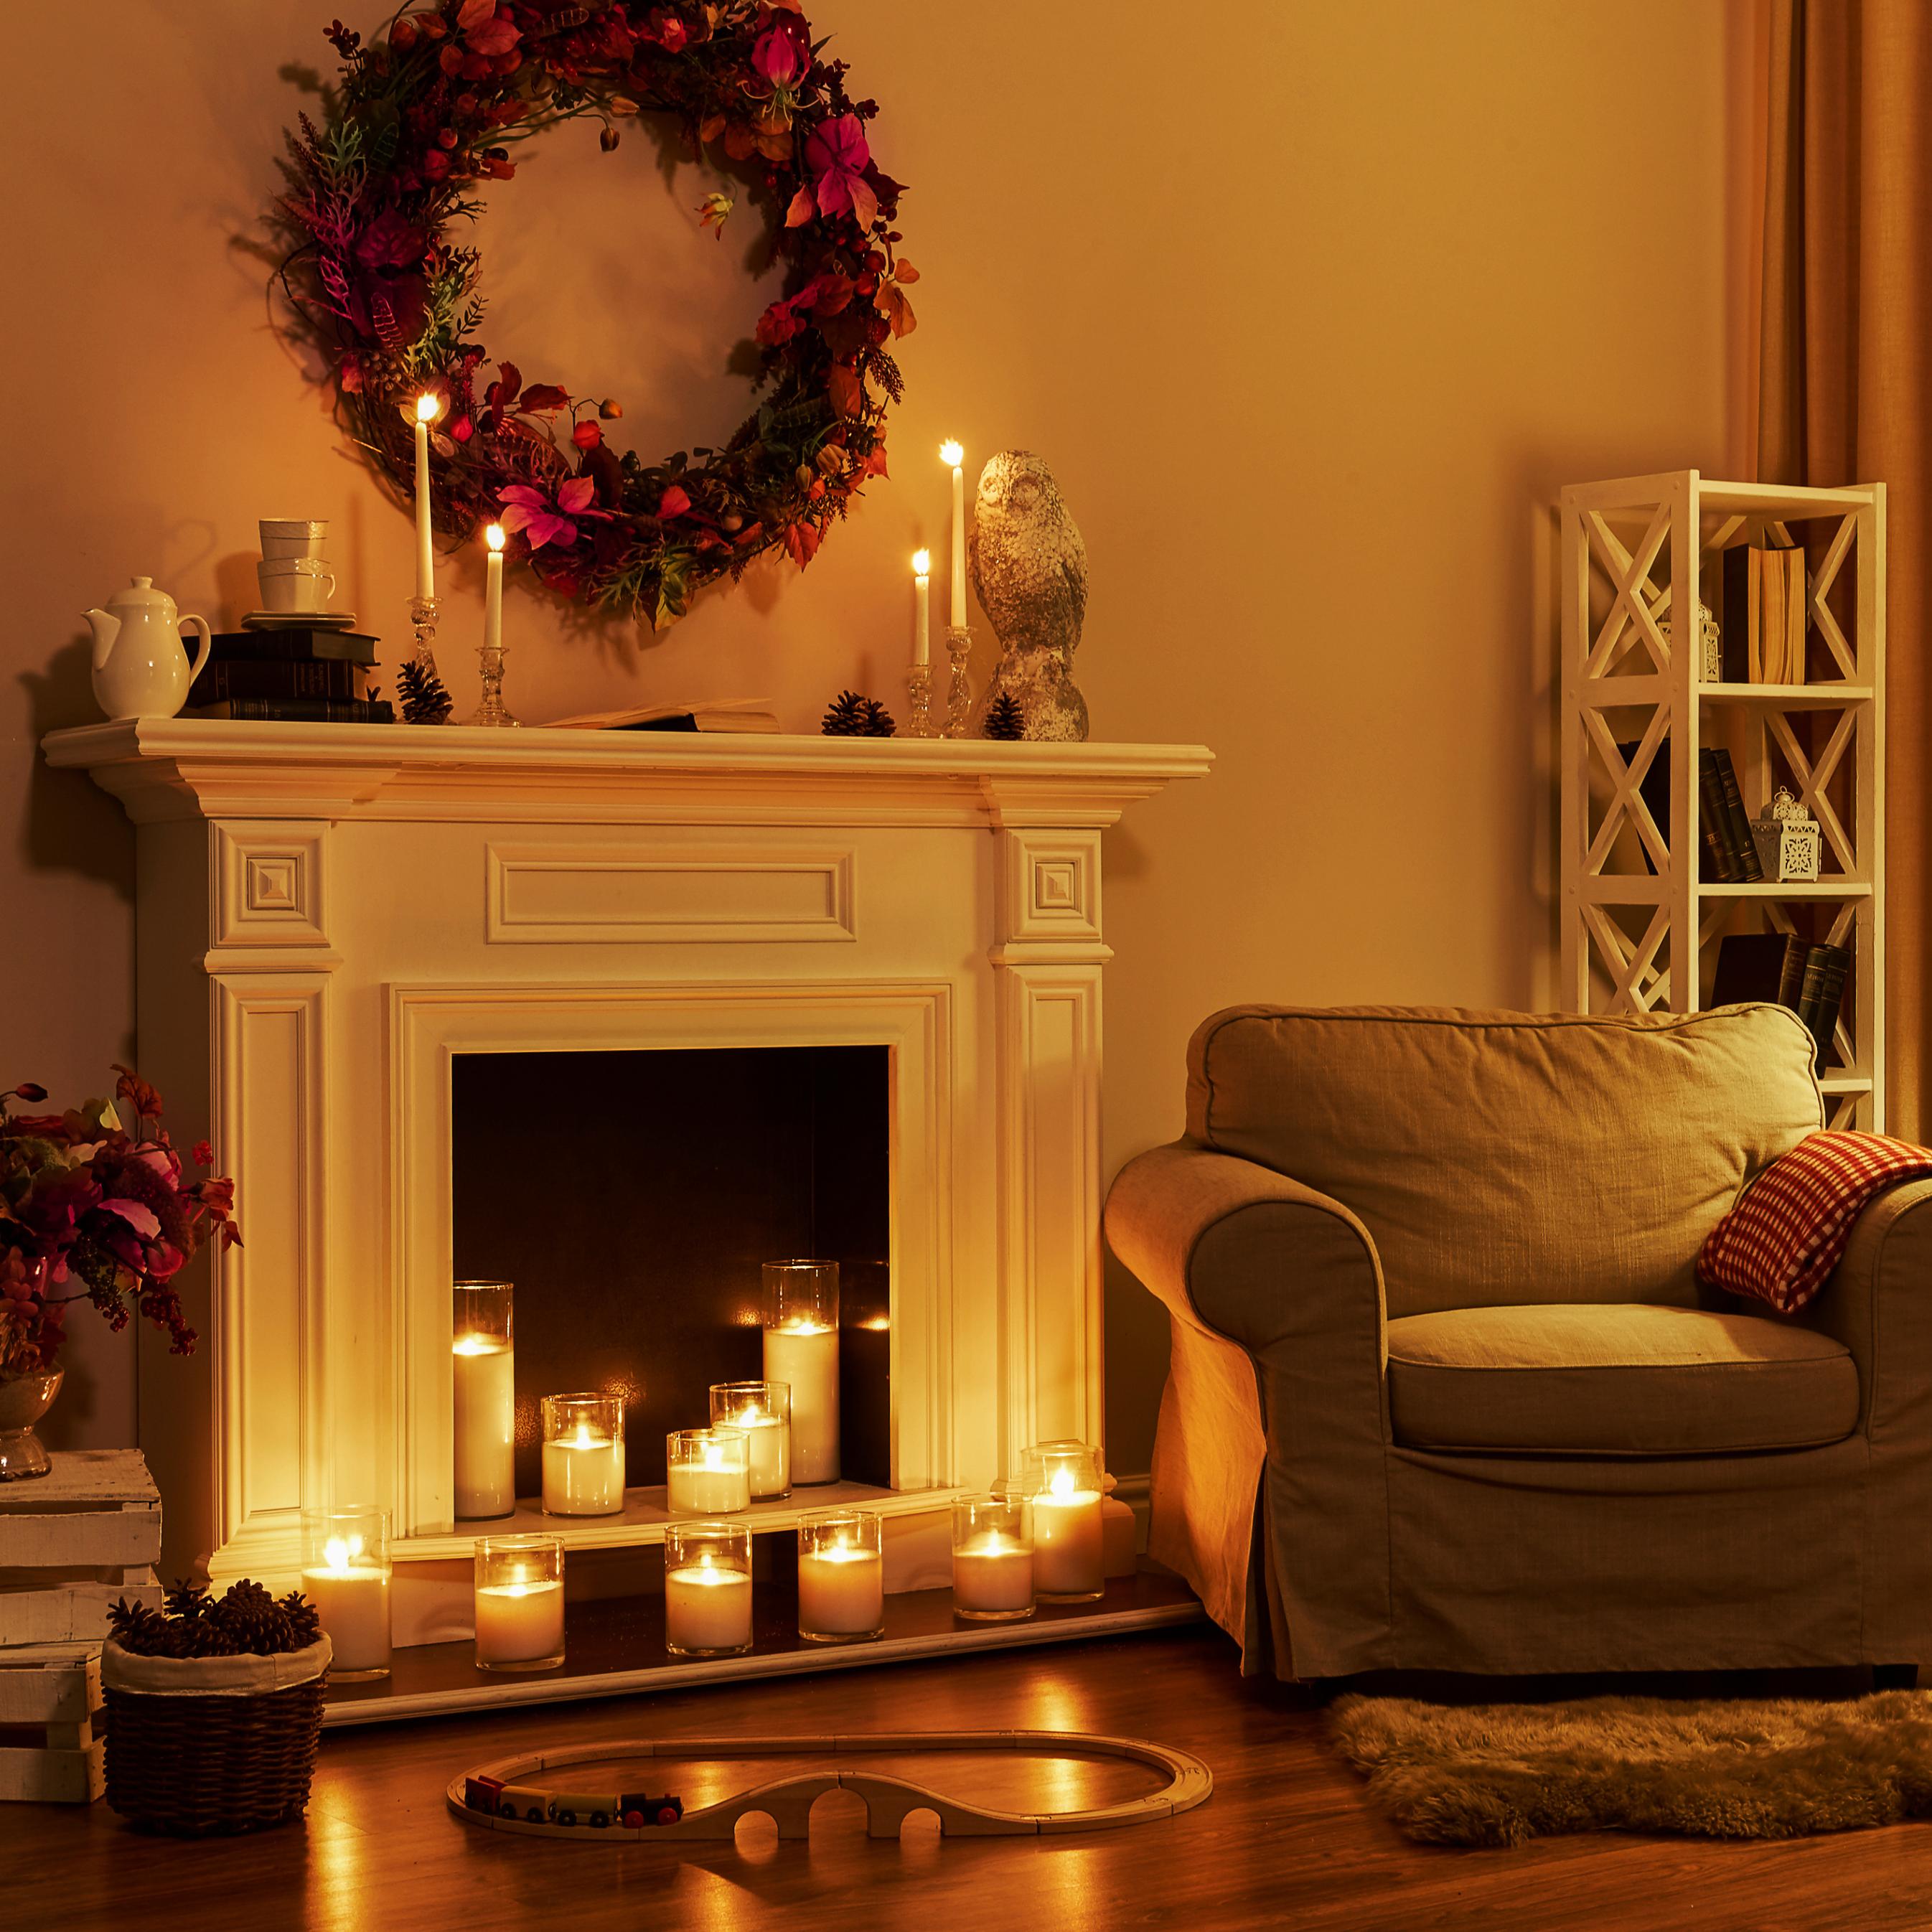 Hygge for the Holidays